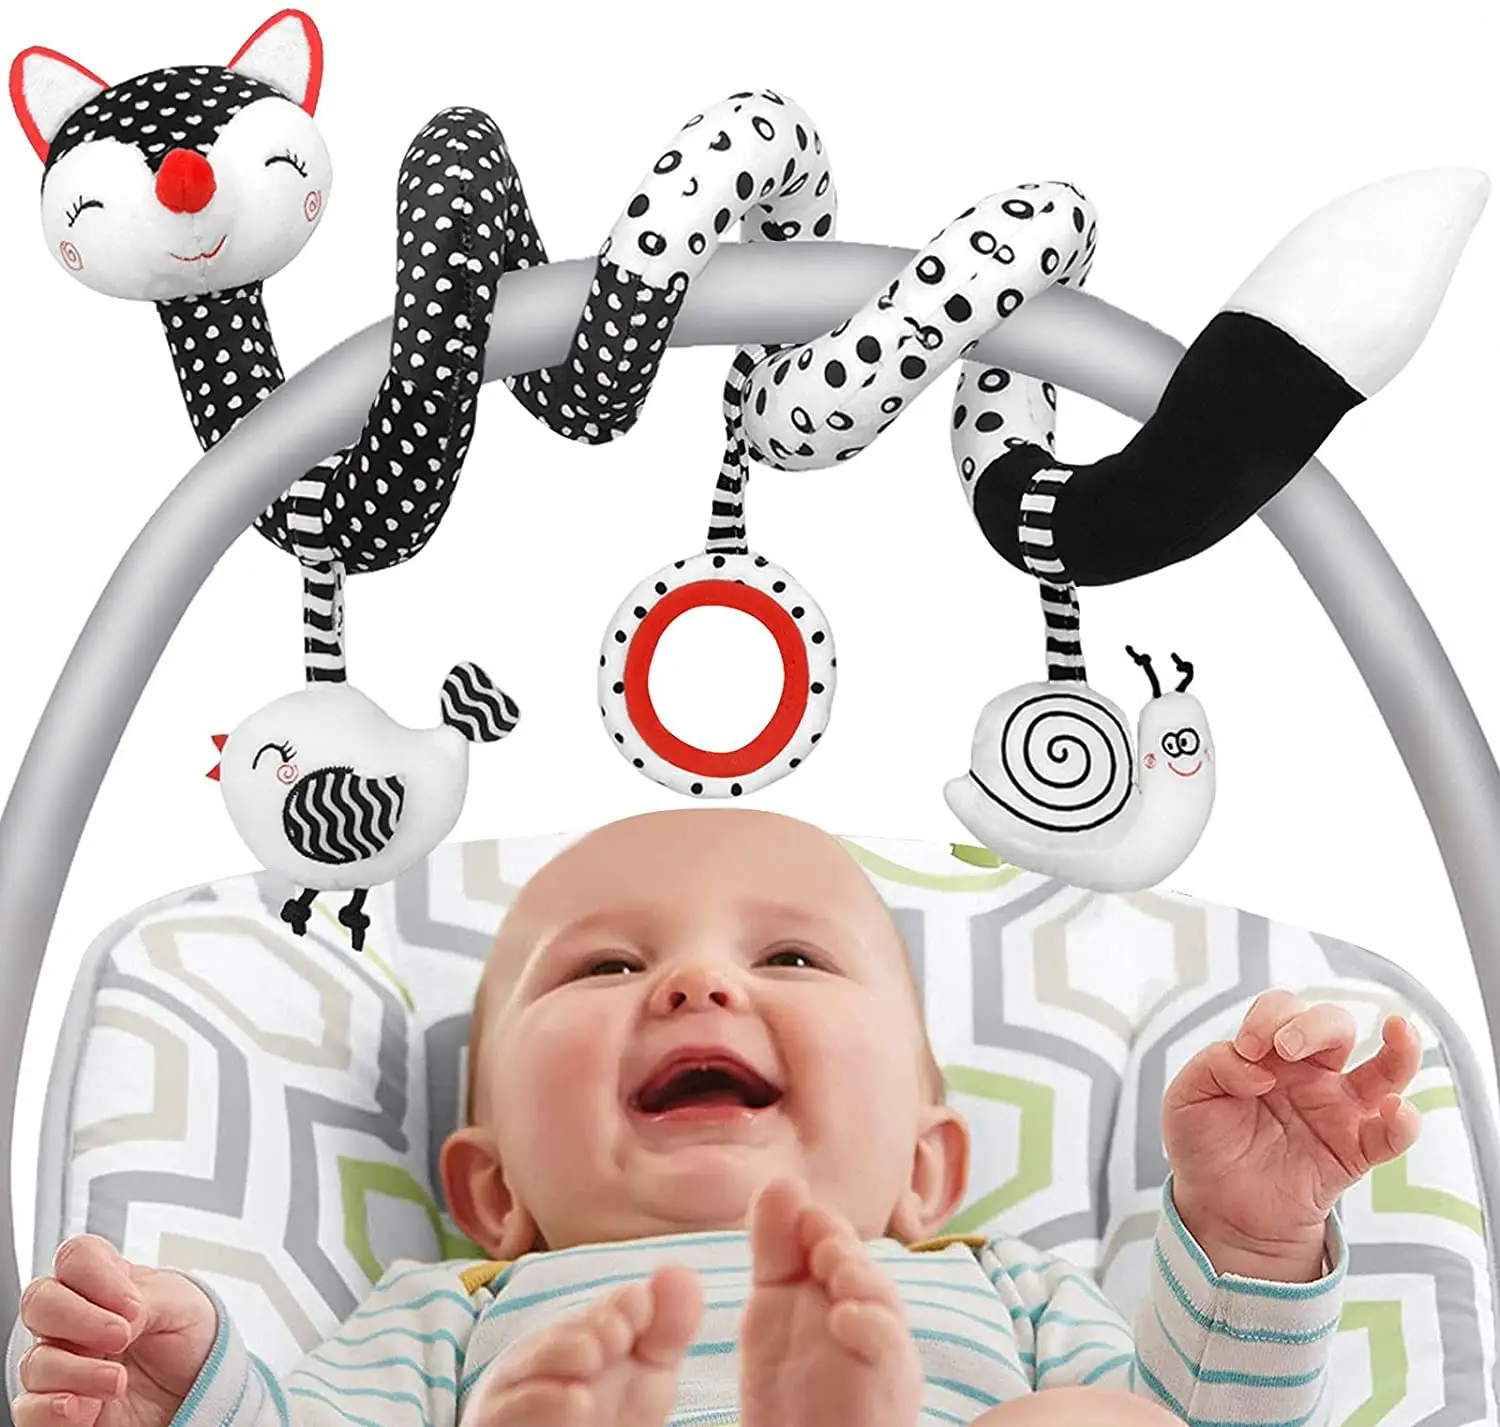 High Contrast Black White Stroller Toy Stretch Spiral Activity Car Seat Baby Toys Hanging Rattle Toys for Crib Mobile